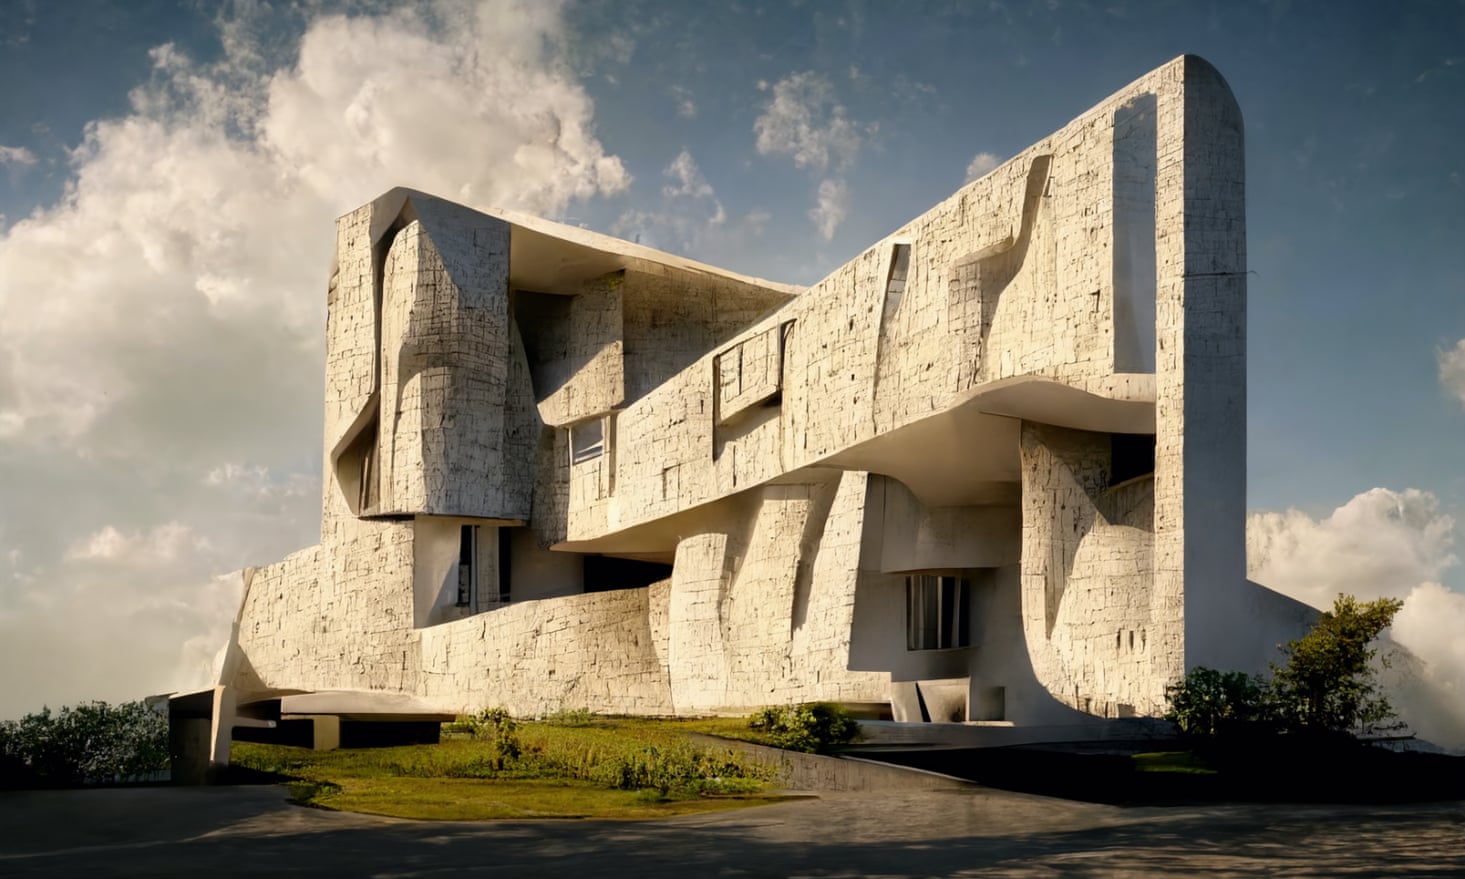 Architecture from beyond the grave … a building created by AI in the style of Le Corbusier.